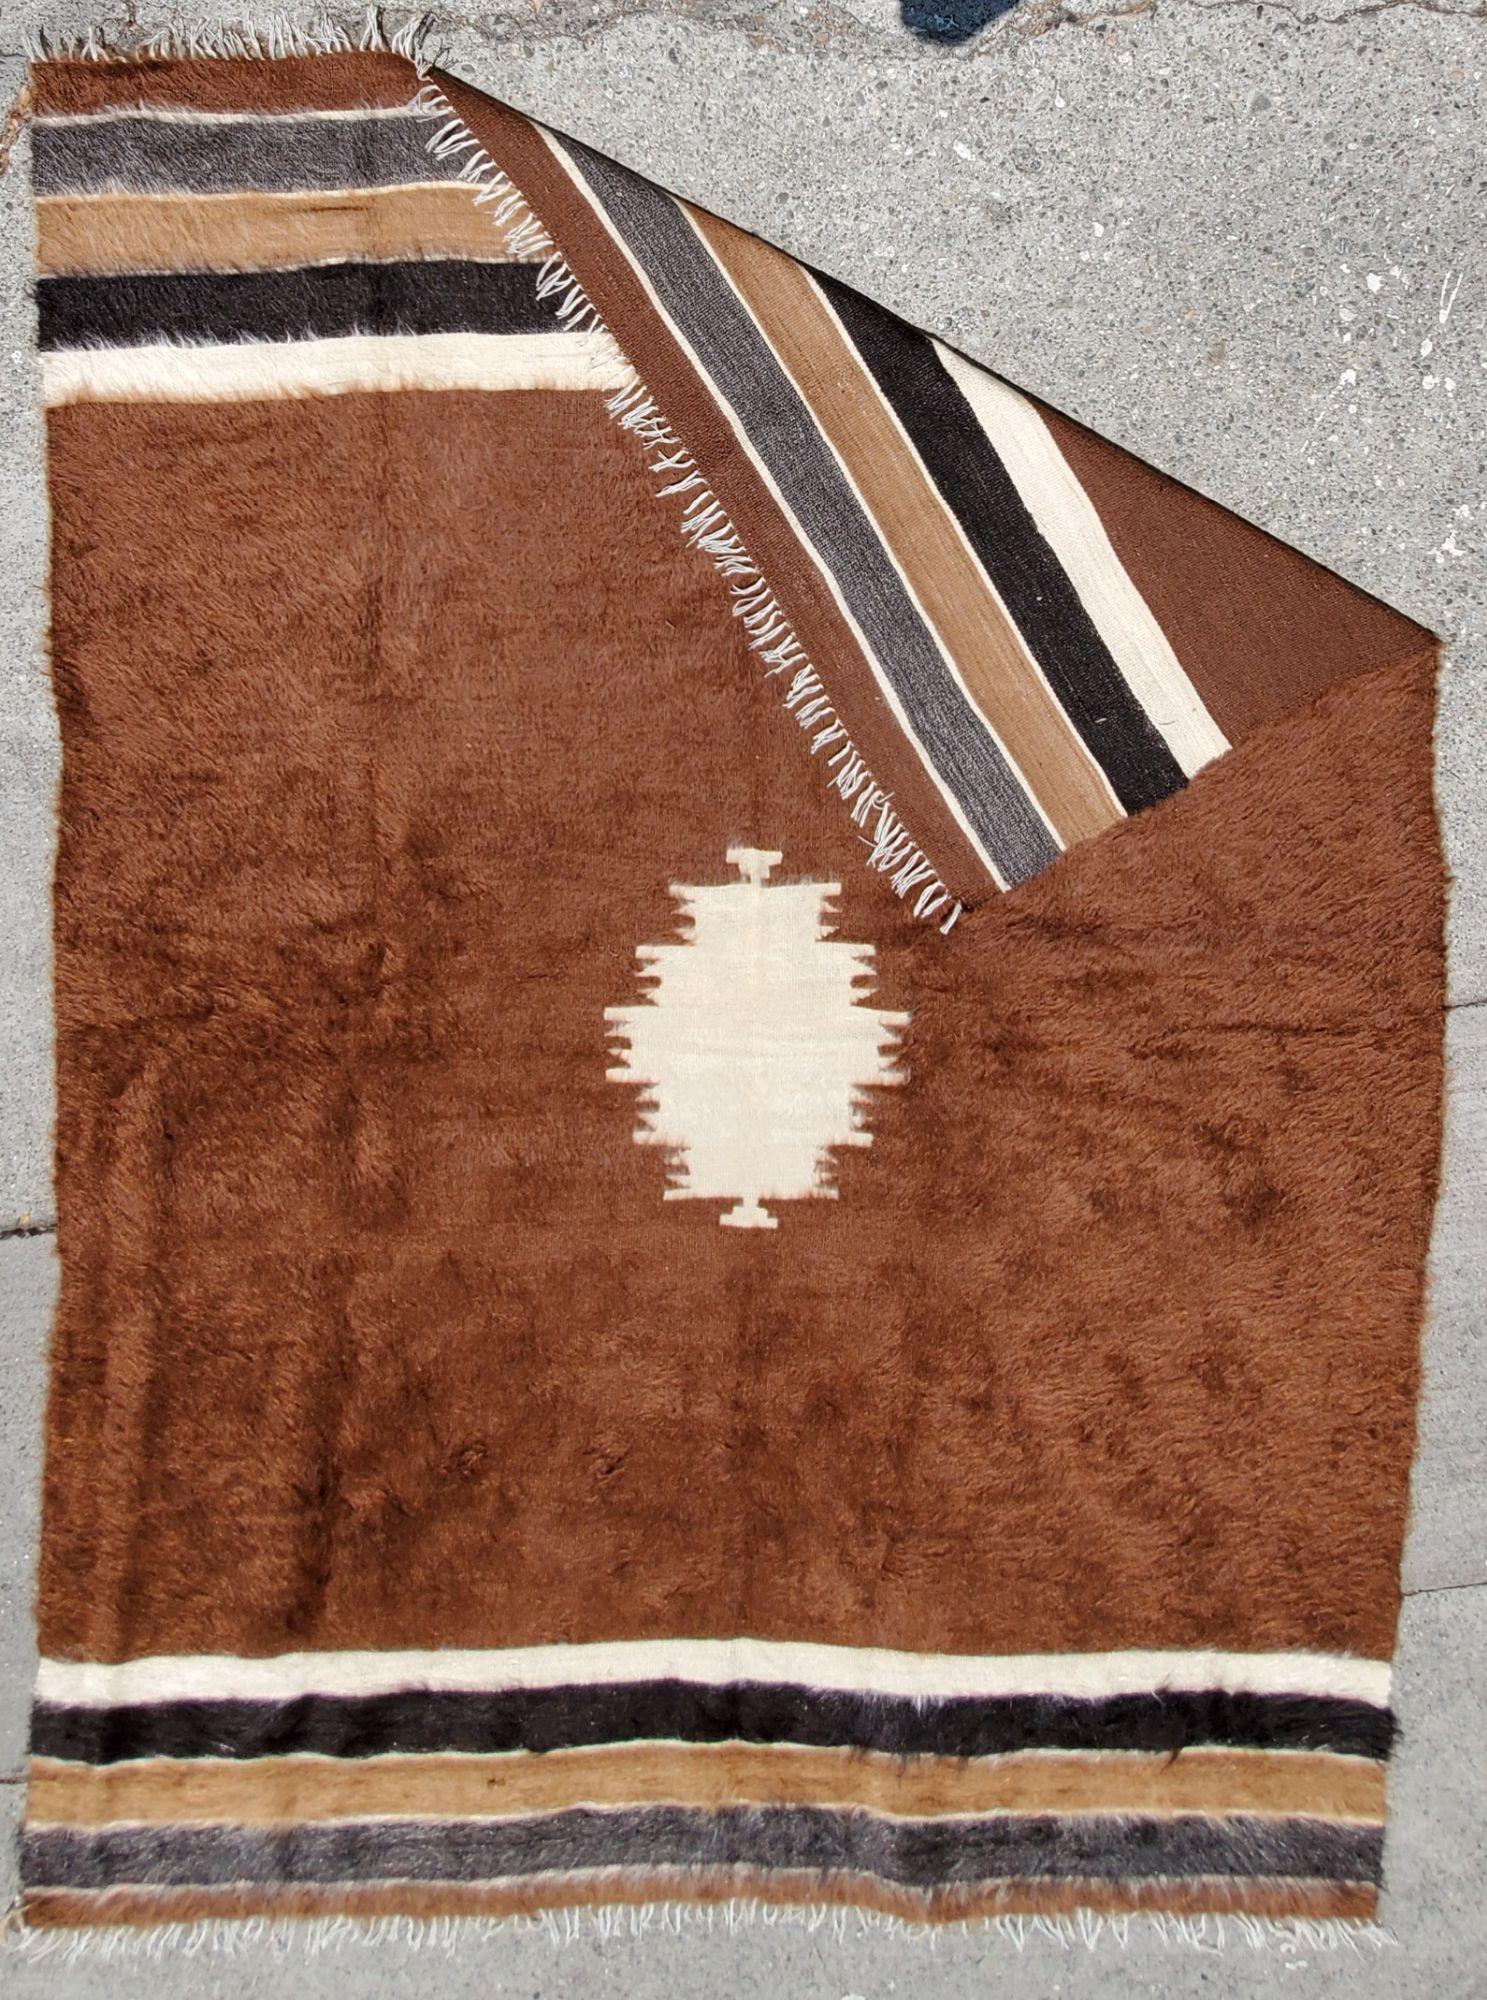 handmade Mohair midcentury Rug - Brown background with center eye and gray white and brown stripes.

measures approx 78 x 67.